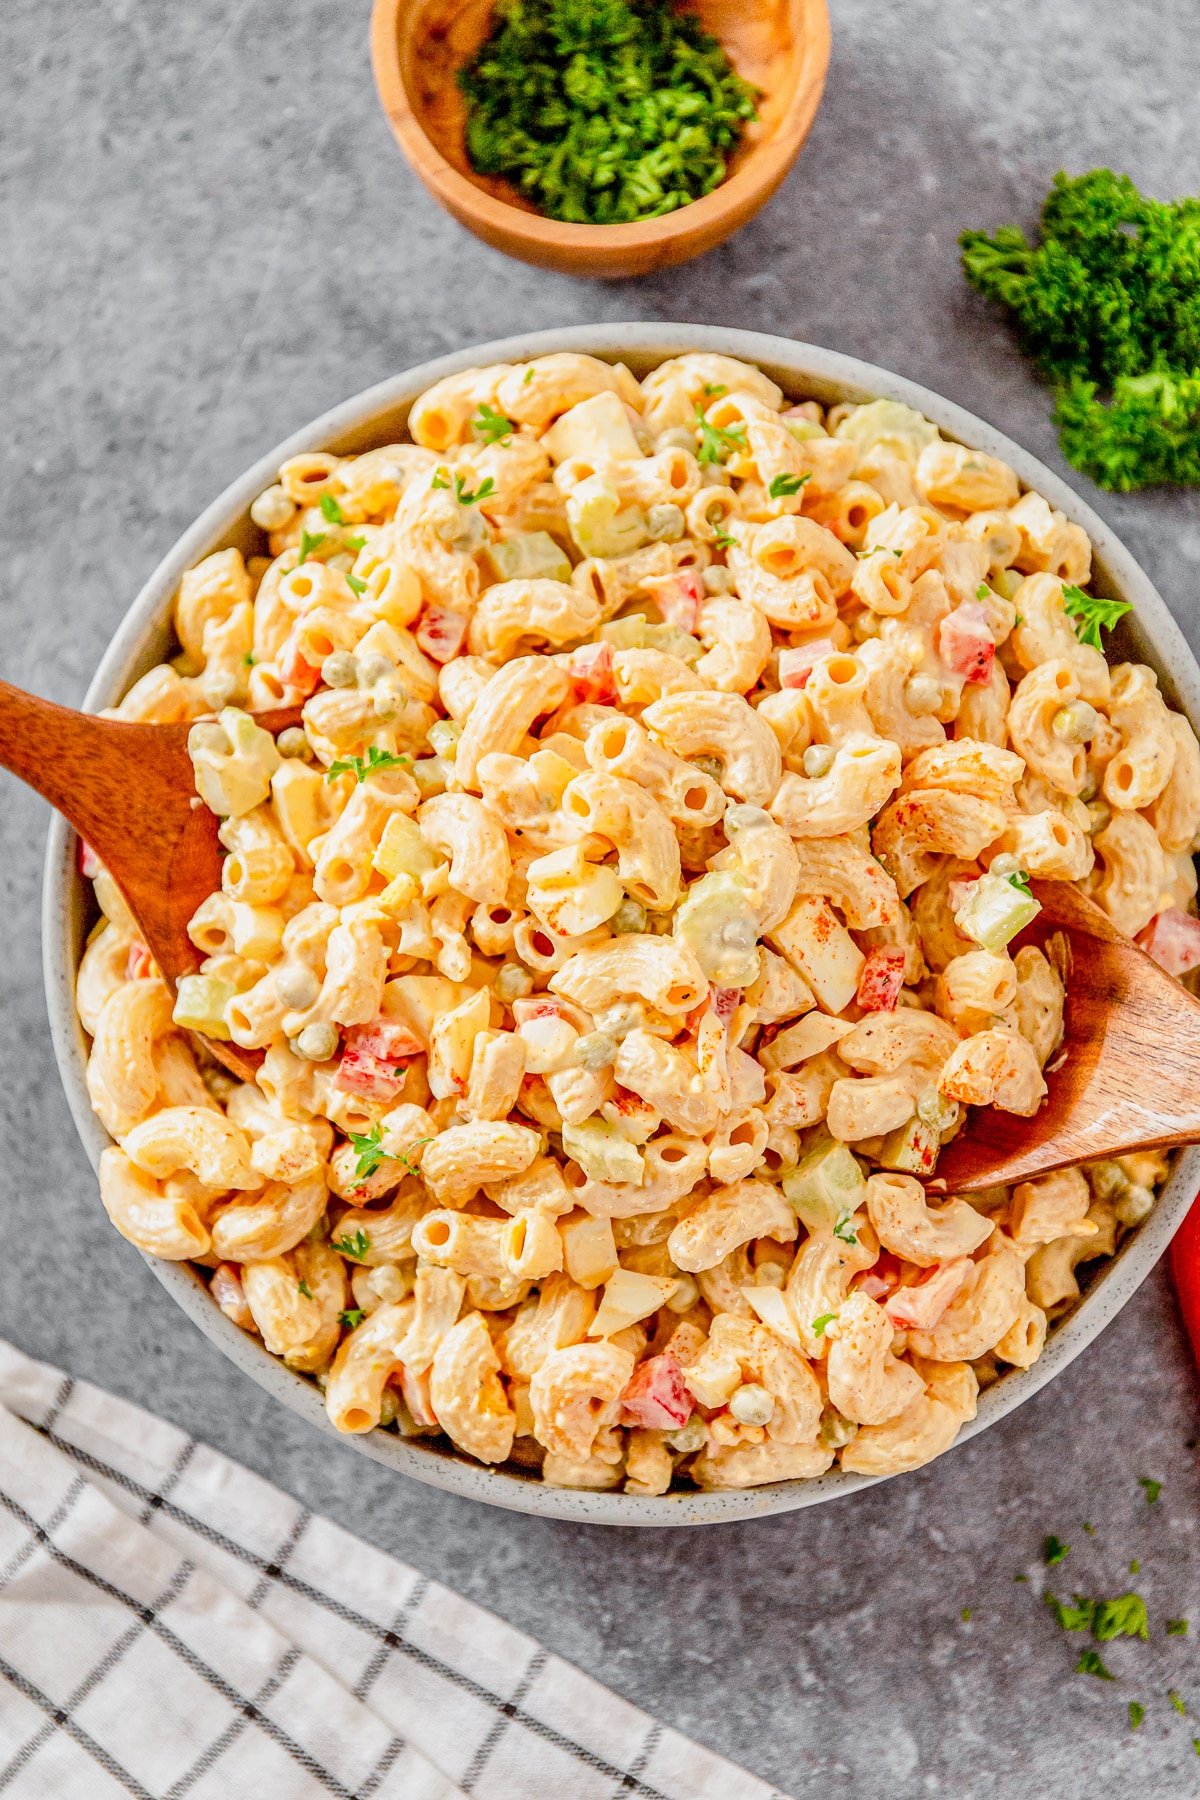 Overhead image of macaroni salad with peas in a grey bowl with serving spoons